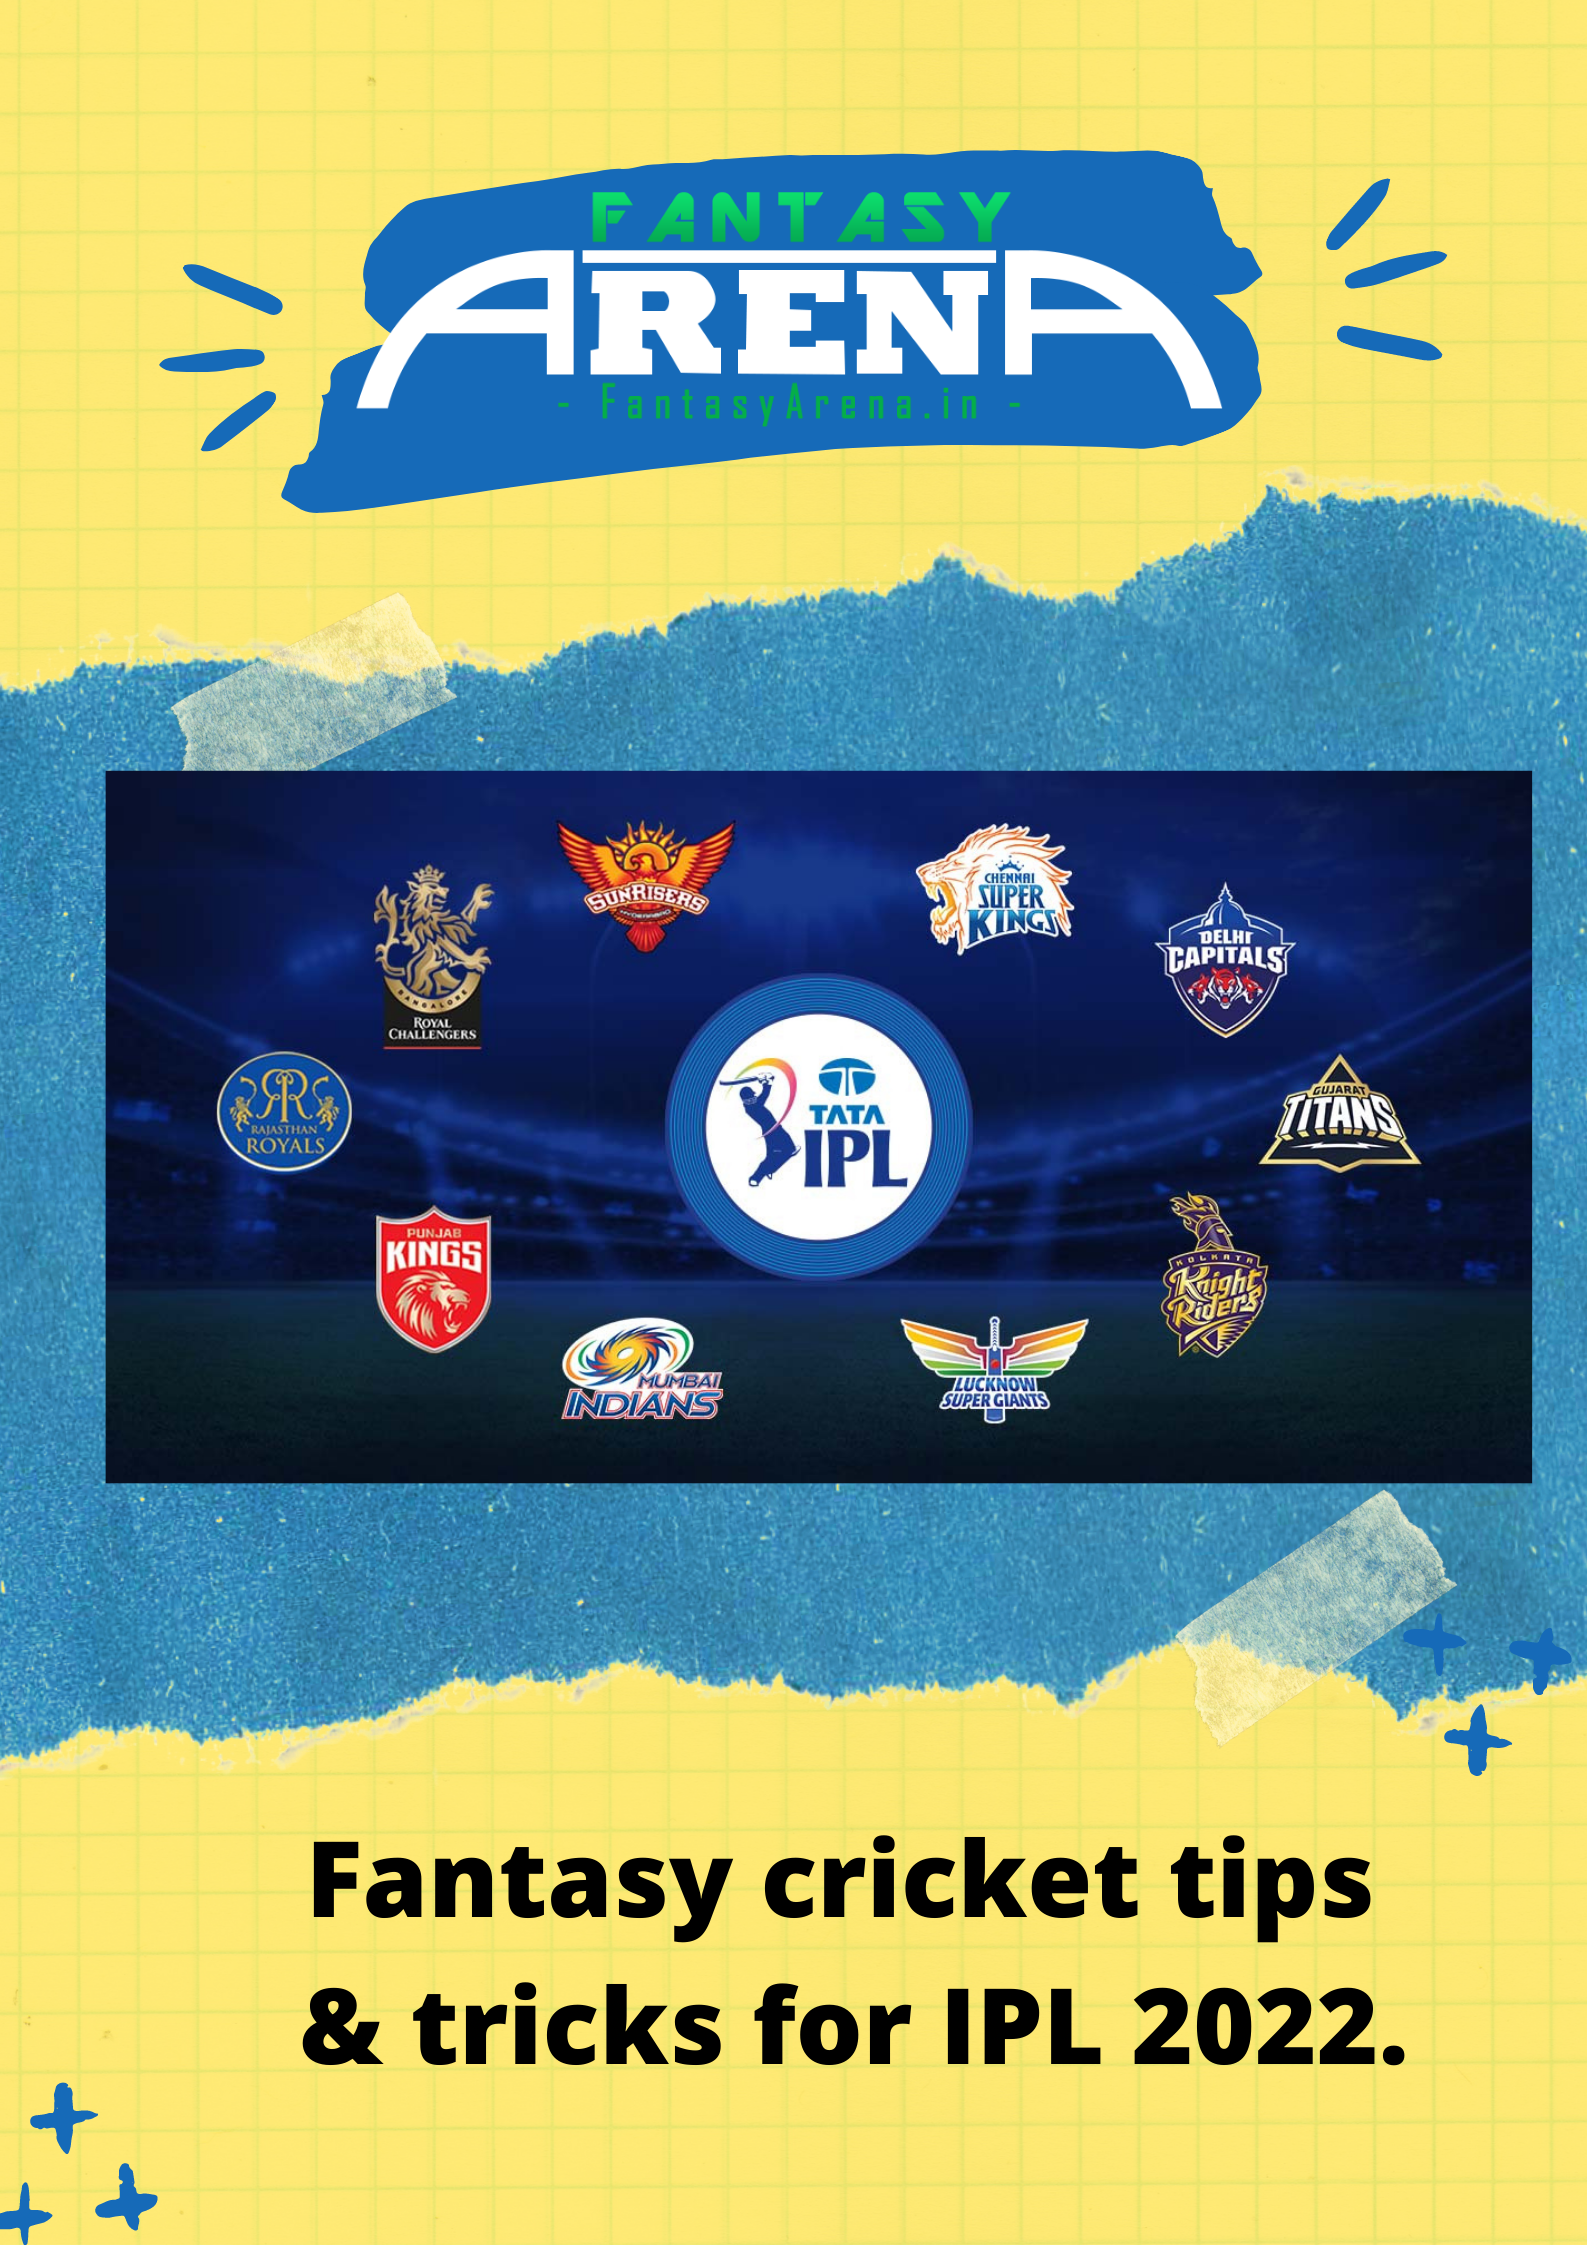 The Ultimate guide to win it big in IPL 2022.